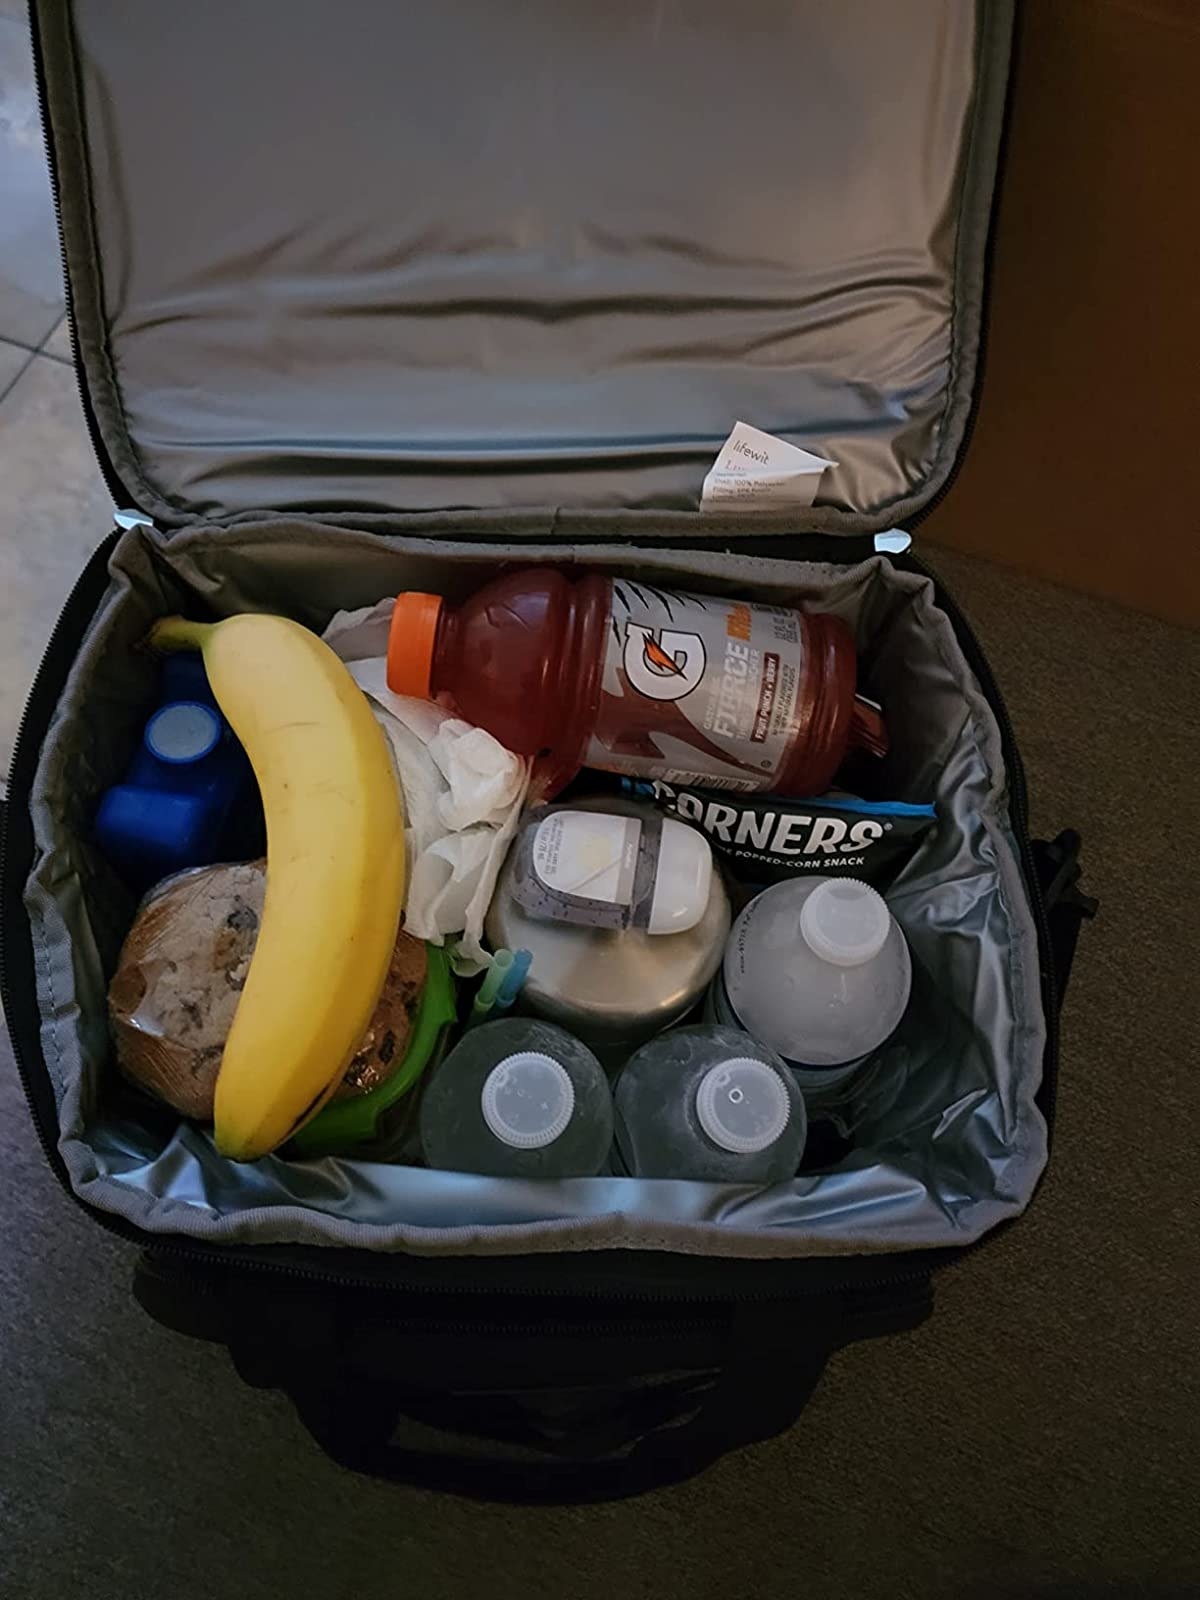 Reviewer image of lunch bag filled with food and drinks